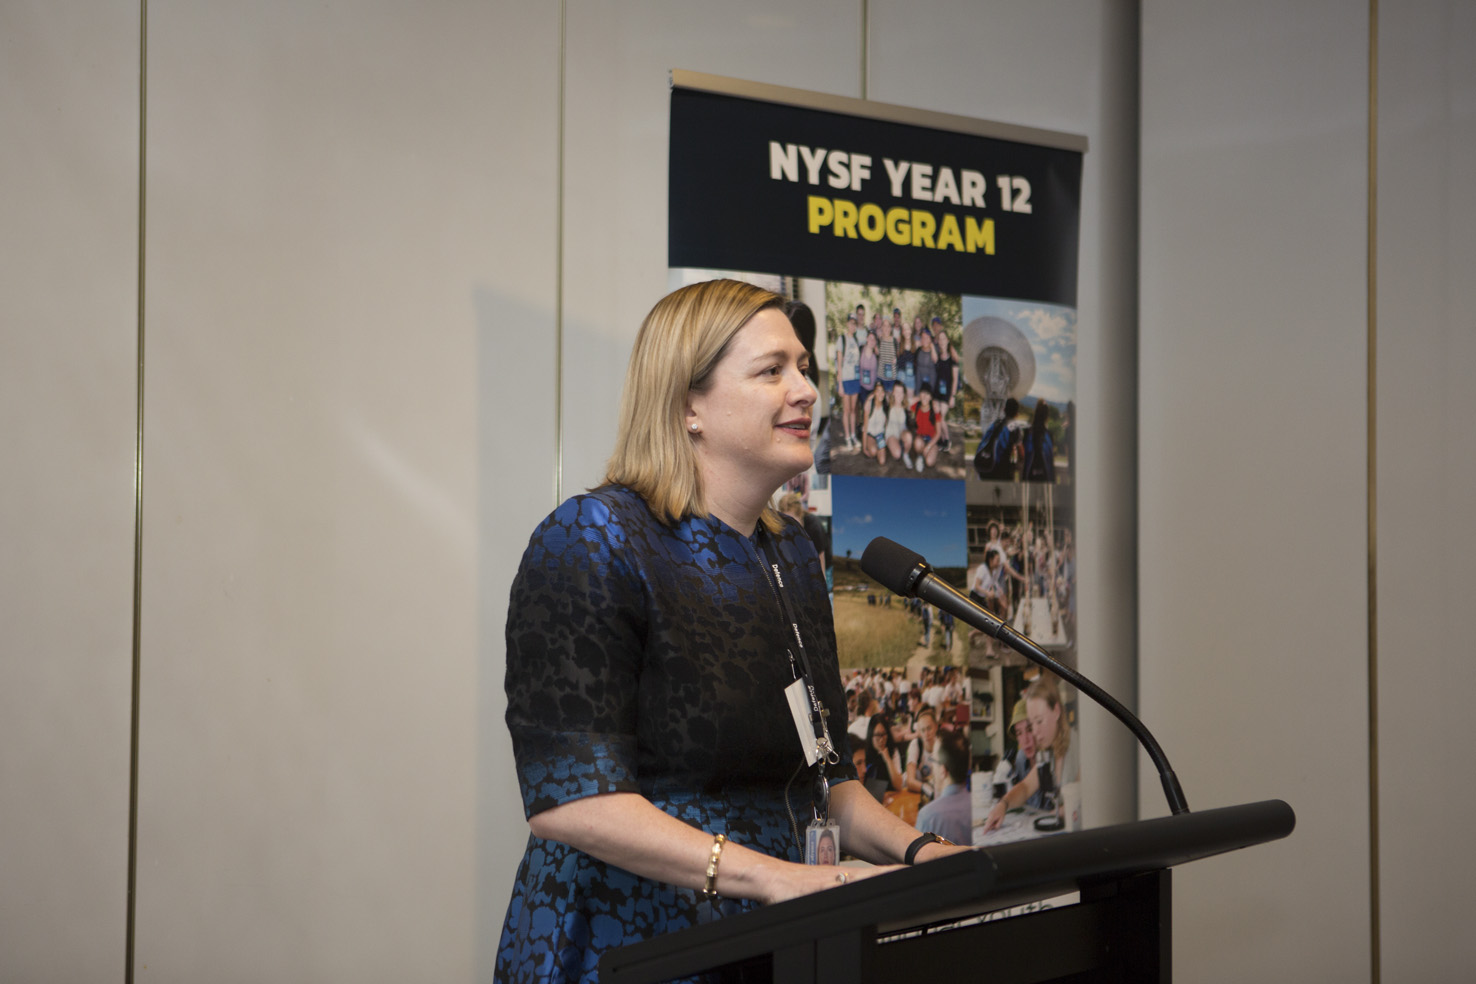 National Launch for the NYSF 2020 Year 12 Program - content image